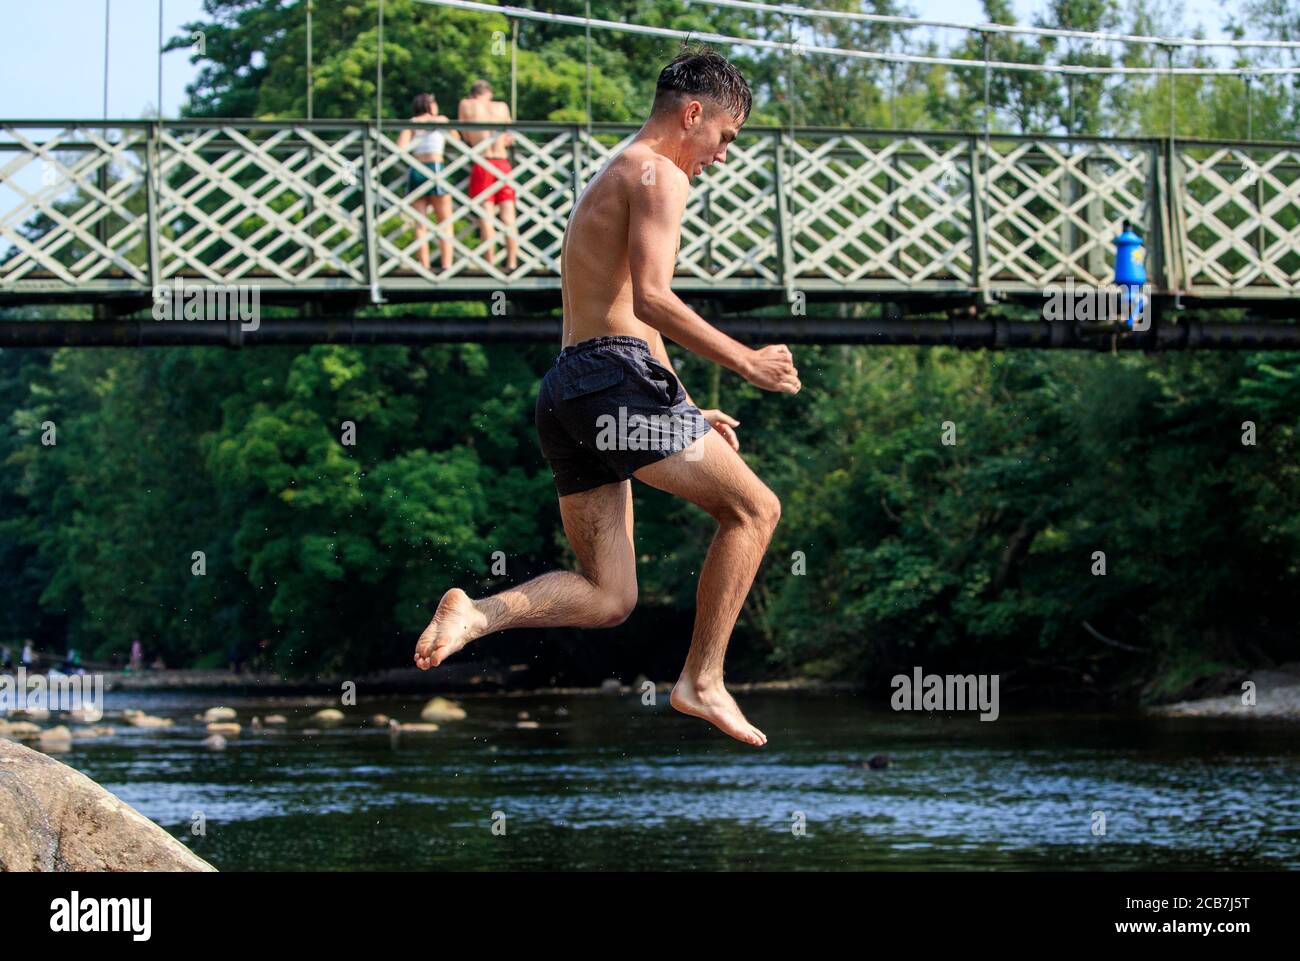 A person jumps from a rock into the River Wharfe near Ilkley in Yorkshire, as people continue to enjoy the hot weather. Stock Photo